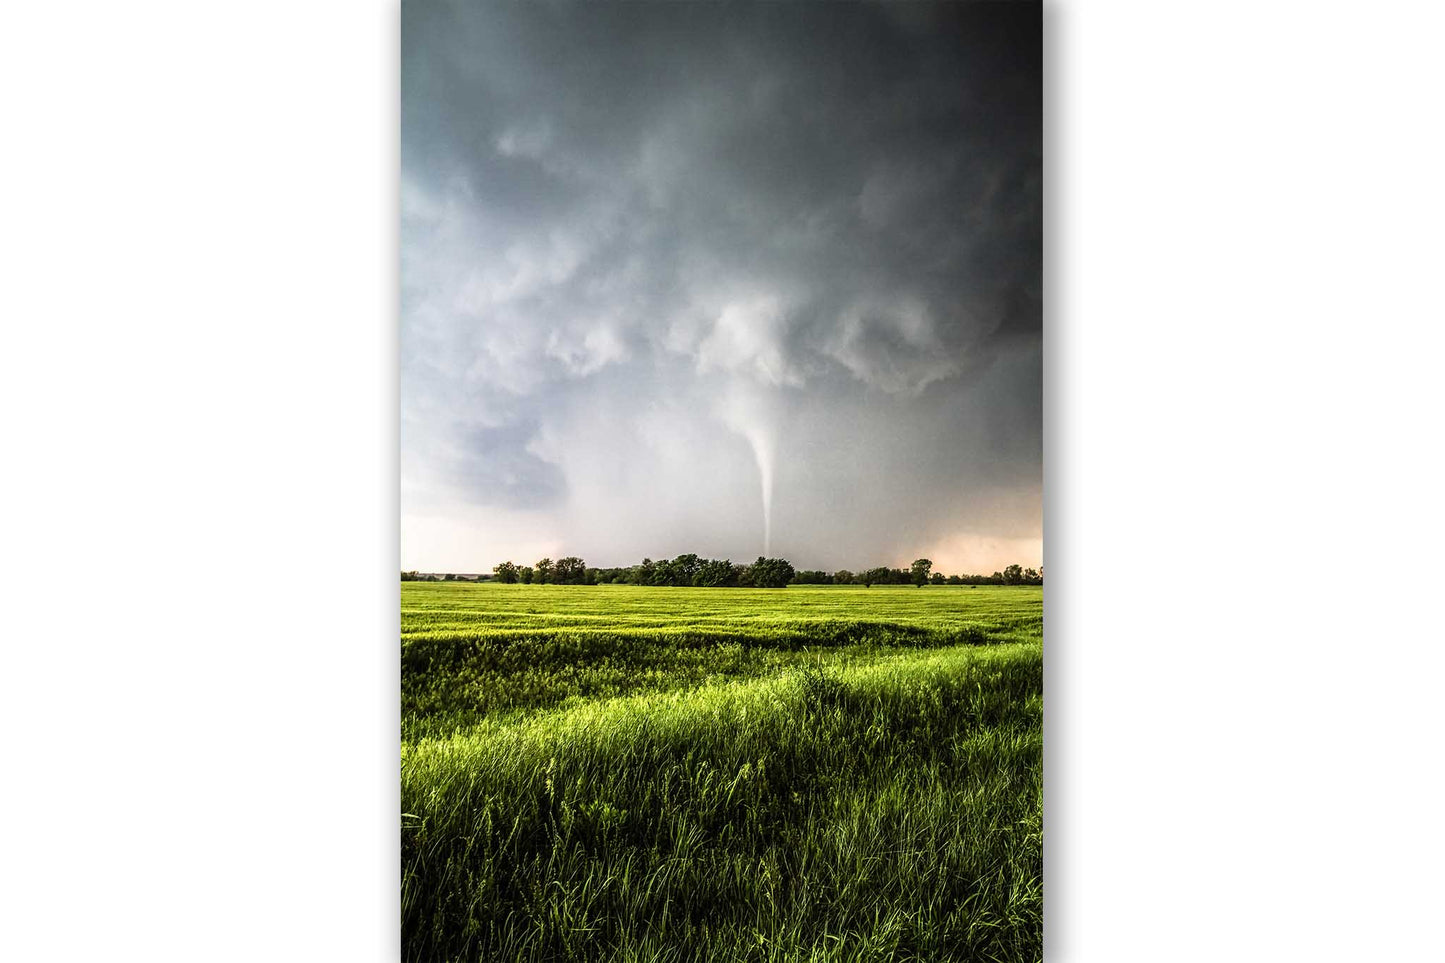 Vertical storm photography print of a tornado emerging from heavy rain within a supercell thunderstorm on a spring day in Kansas by Sean Ramsey of Southern Plains Photography.